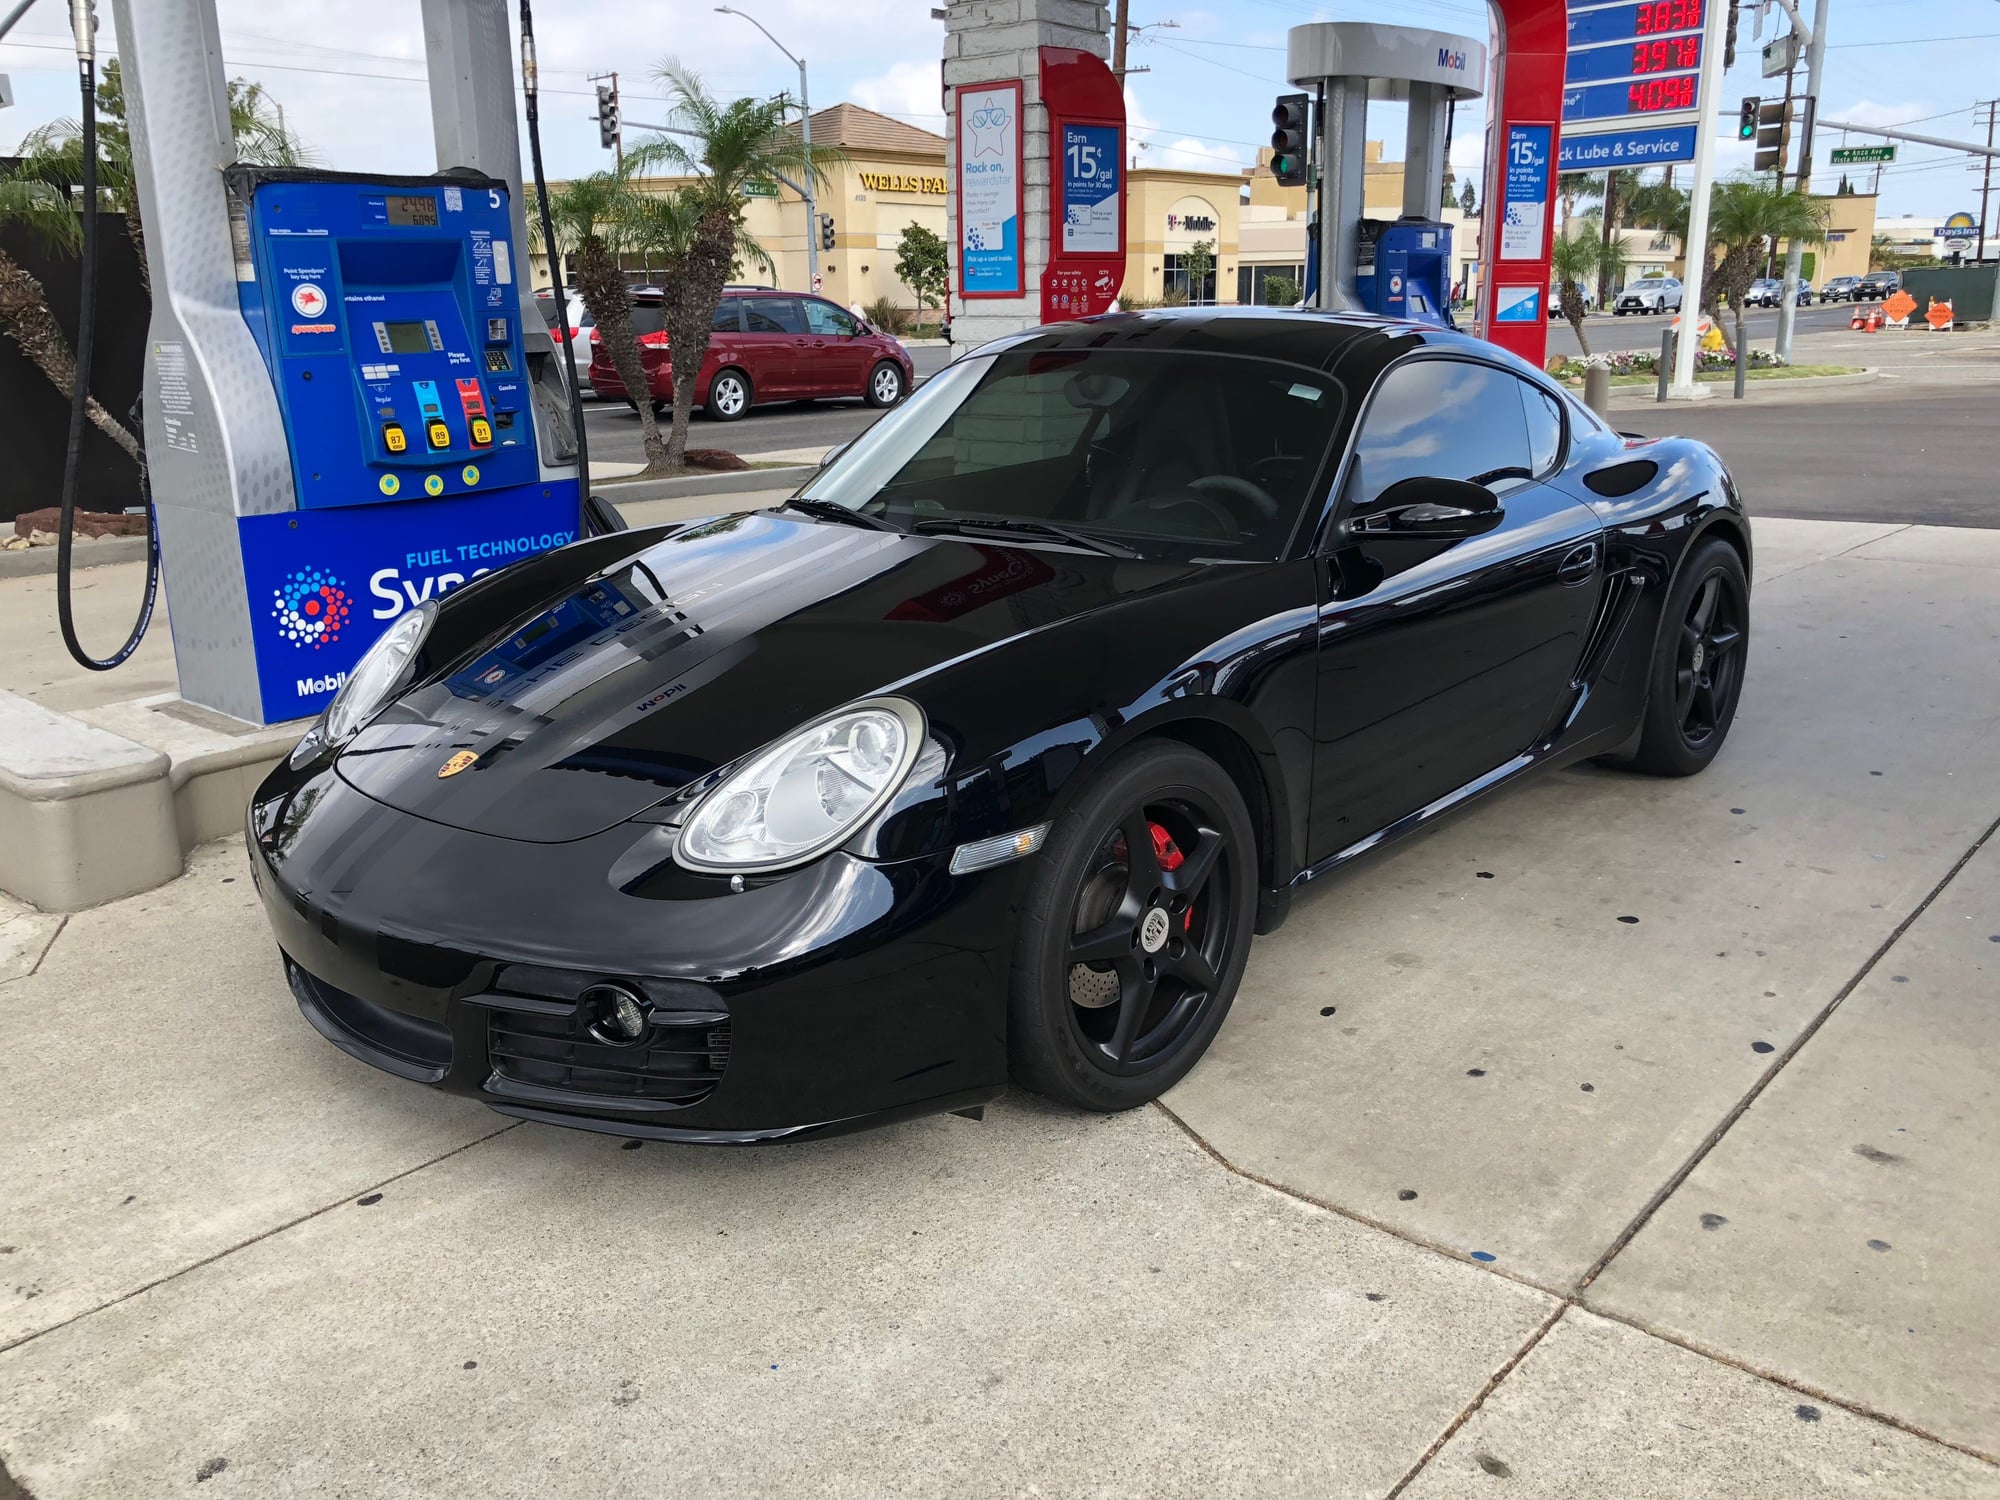 Wheels and Tires/Axles - OE Porsche 911 Wheels and Nitto Tires - Used - All Years Porsche All Models - Redondo Beach, CA 90277, United States